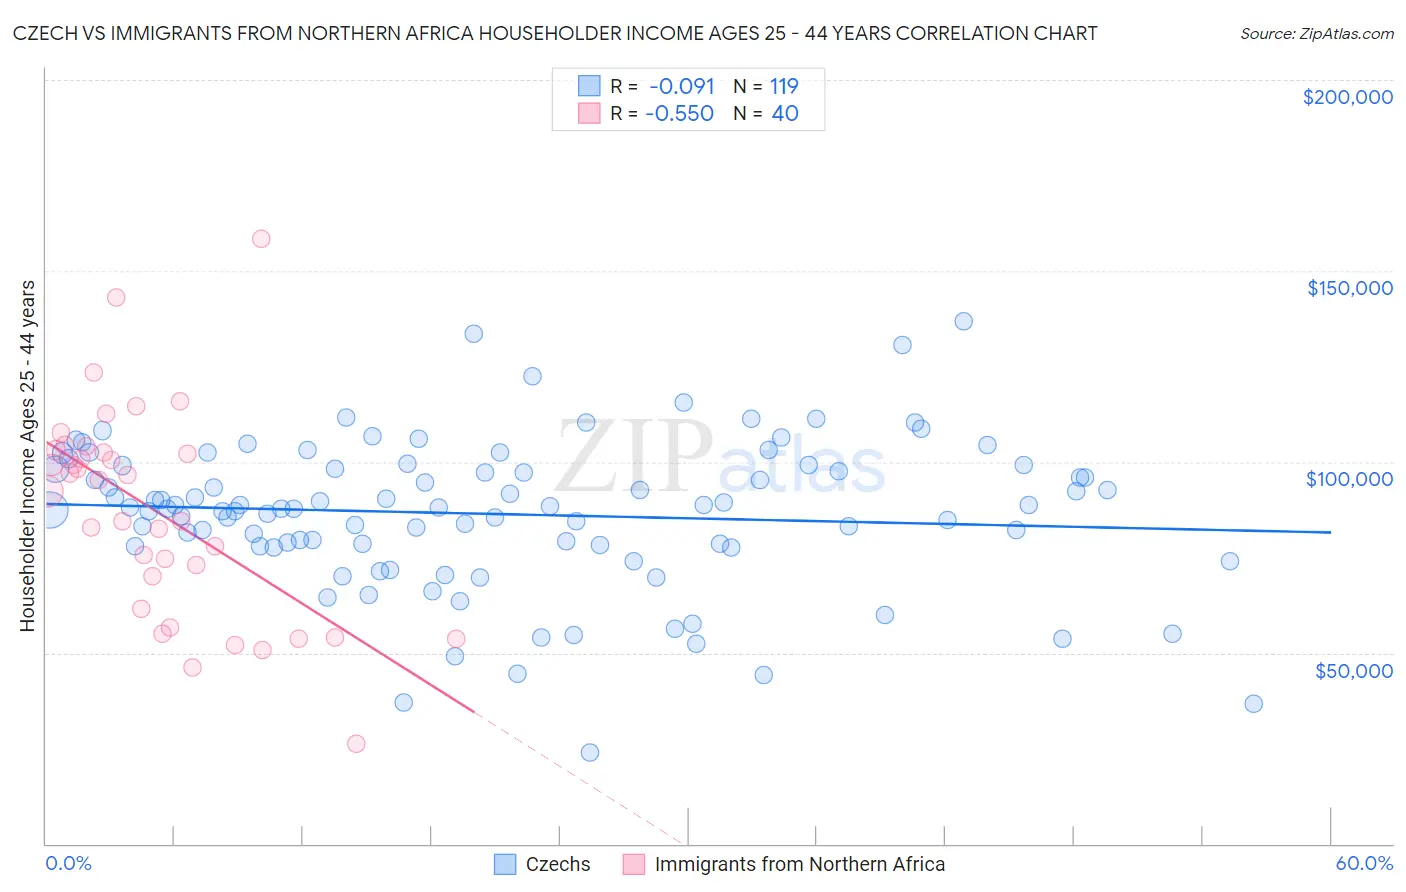 Czech vs Immigrants from Northern Africa Householder Income Ages 25 - 44 years